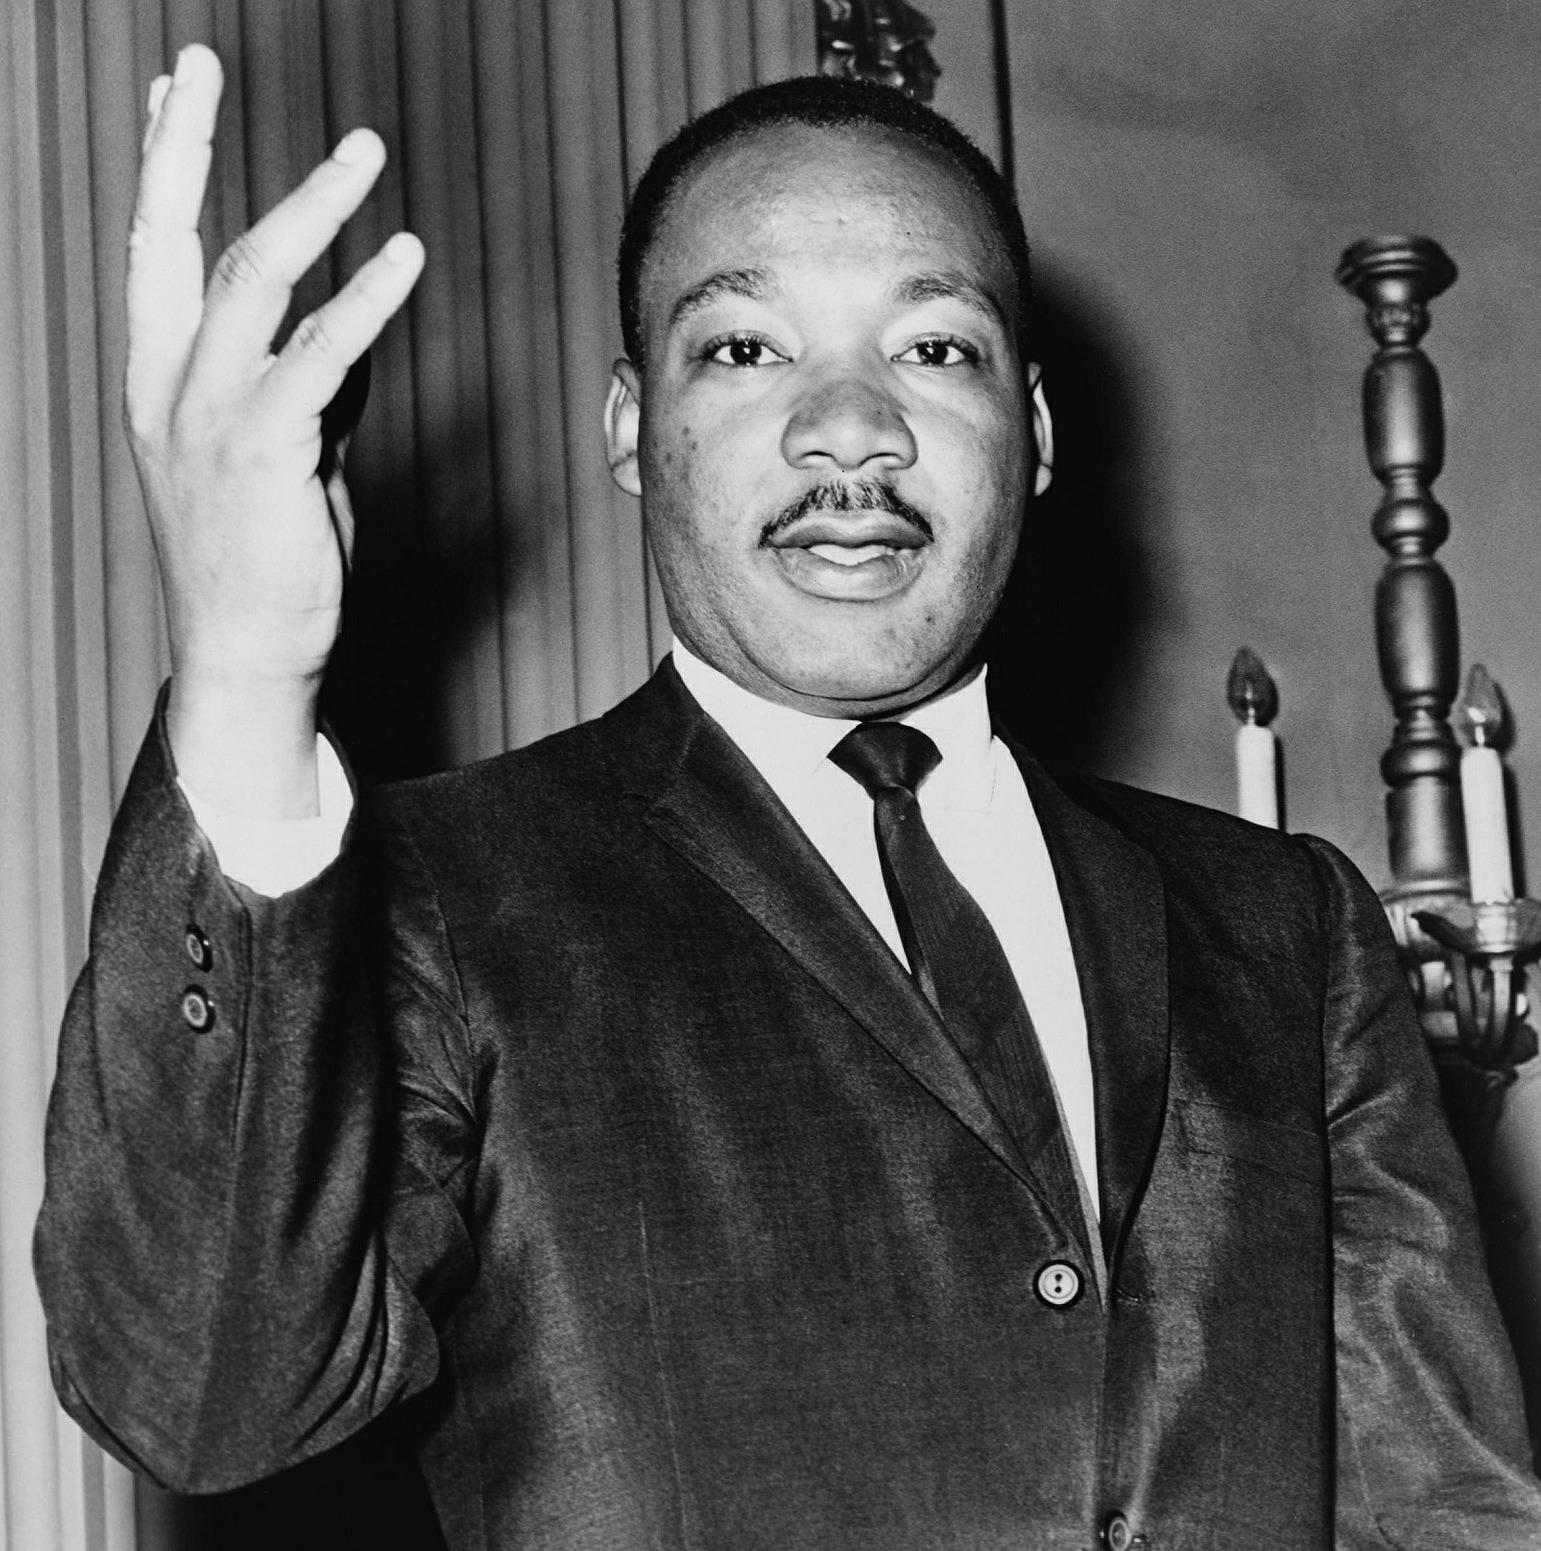 Martin Luther King Jr holding his hand up, black and white picture